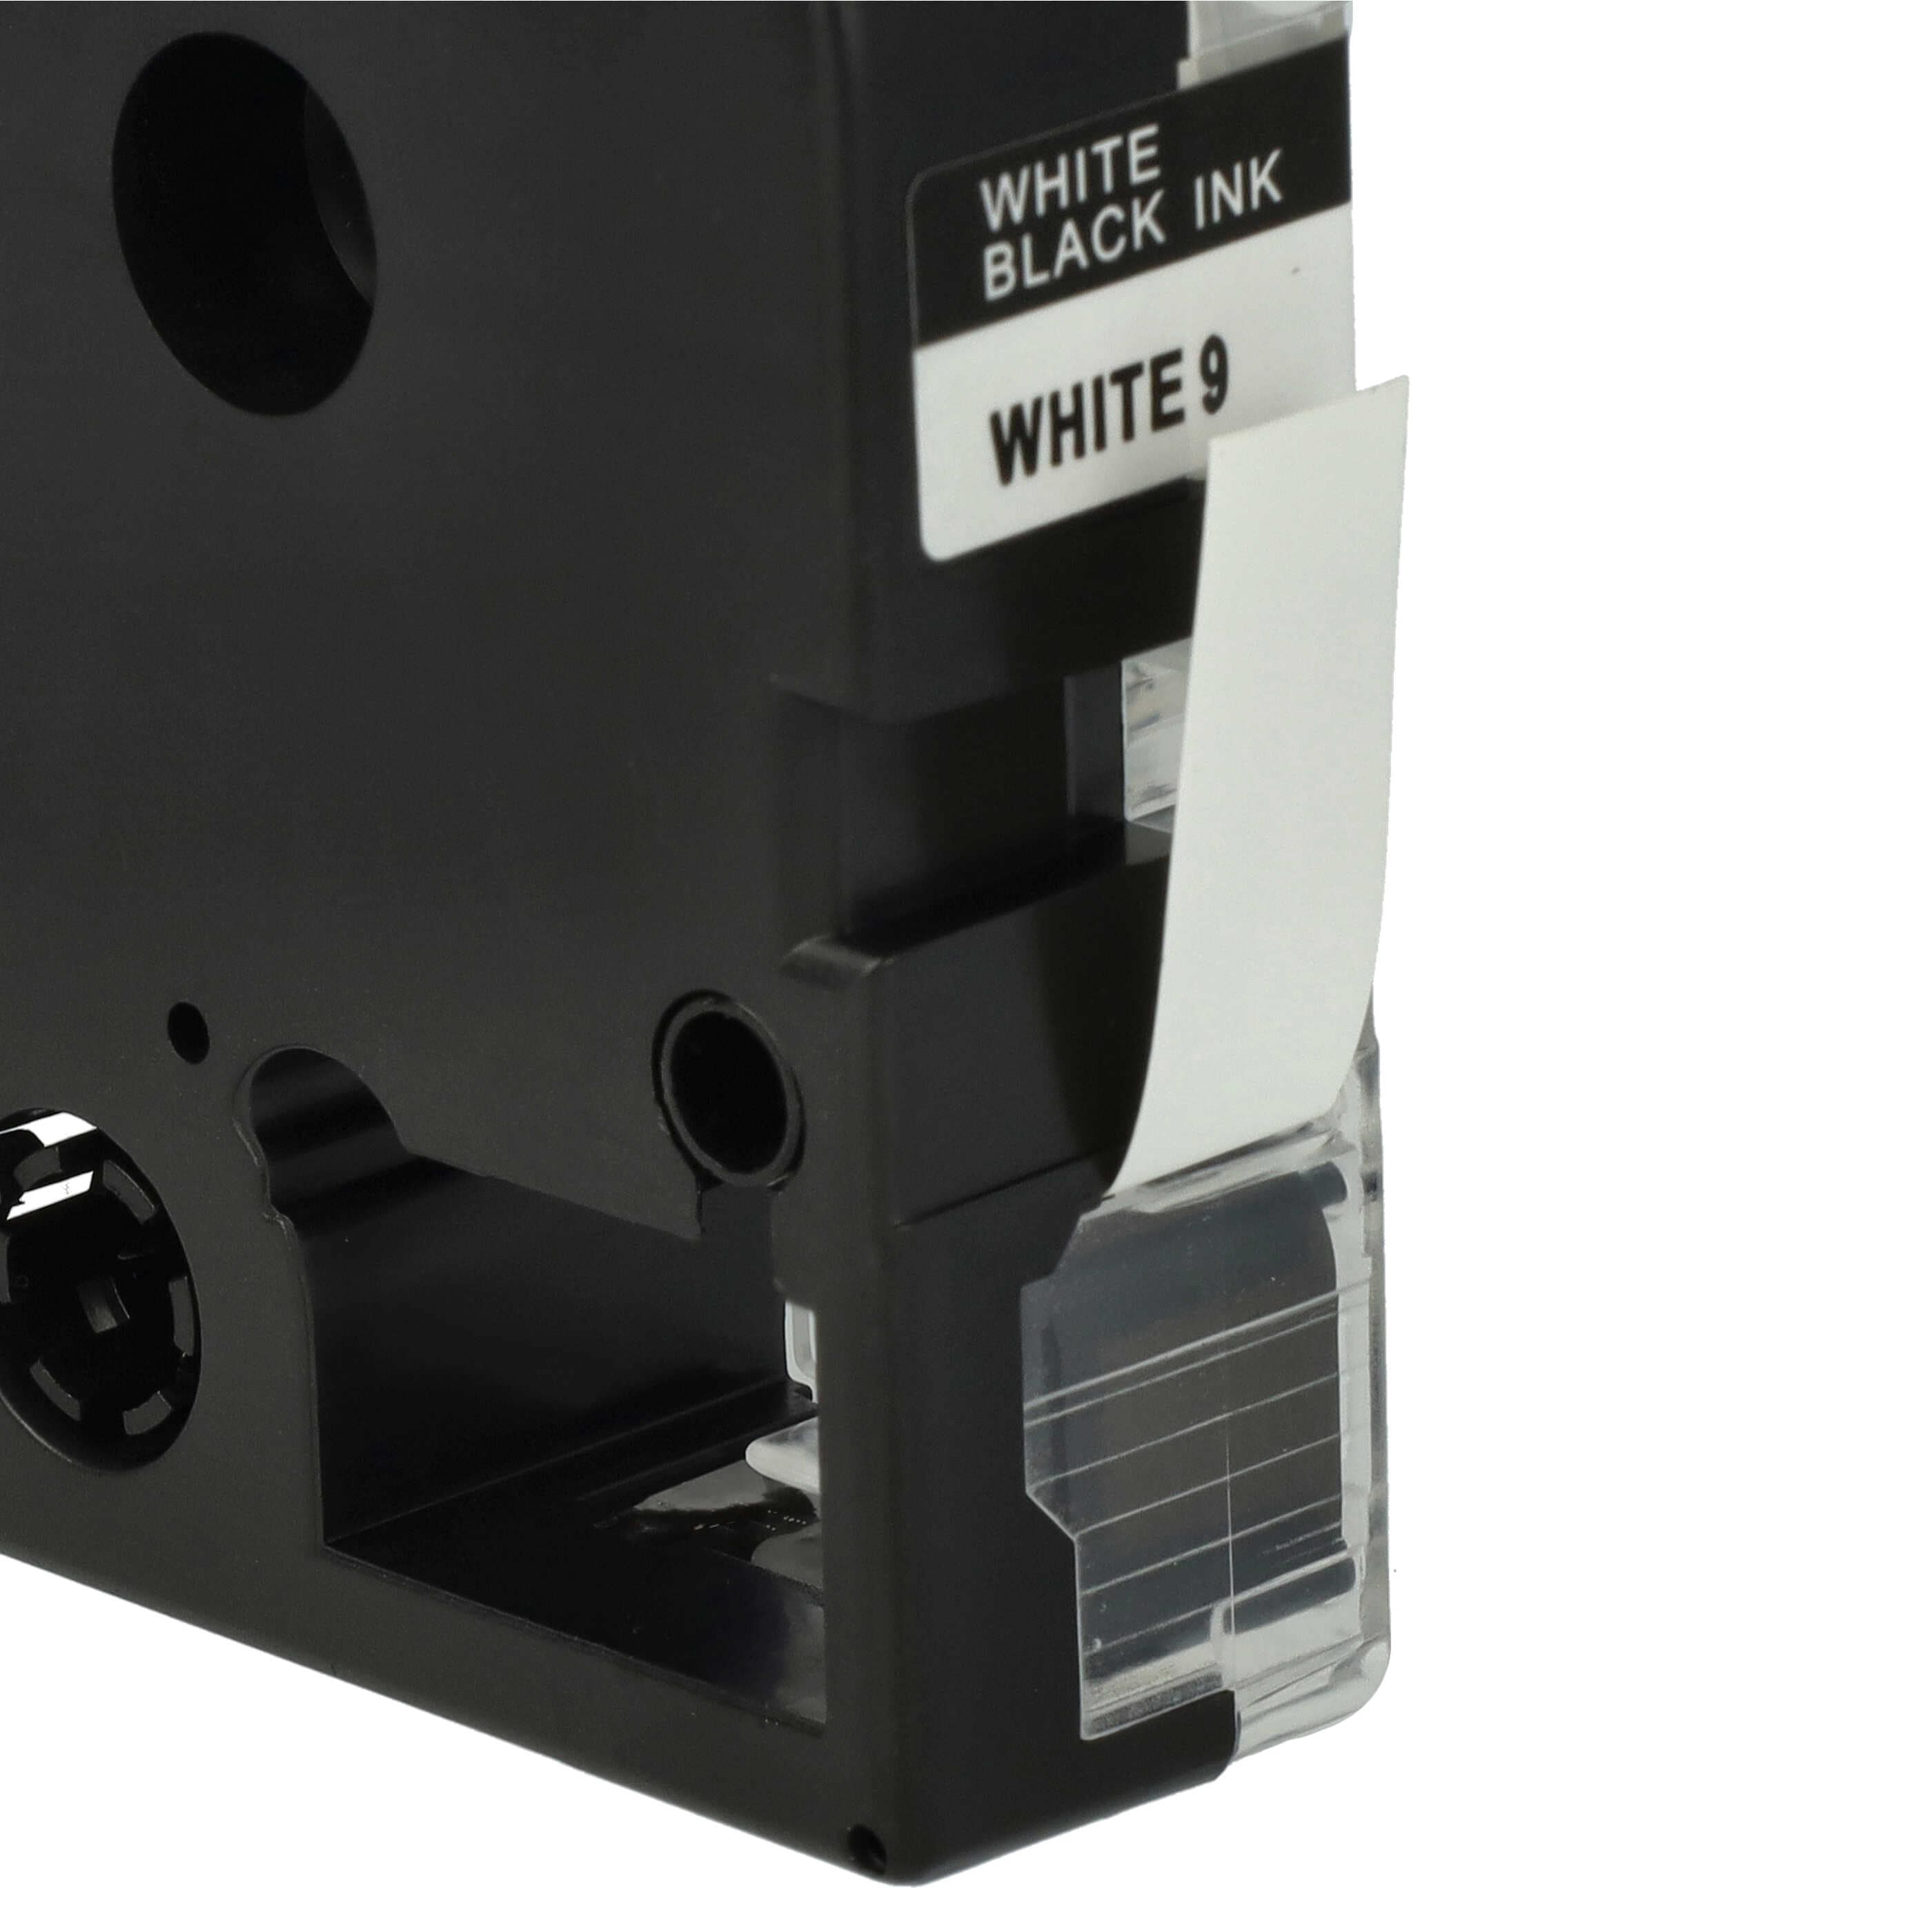 Label Tape as Replacement for Epson LC-3WBN - 9 mm Black to White